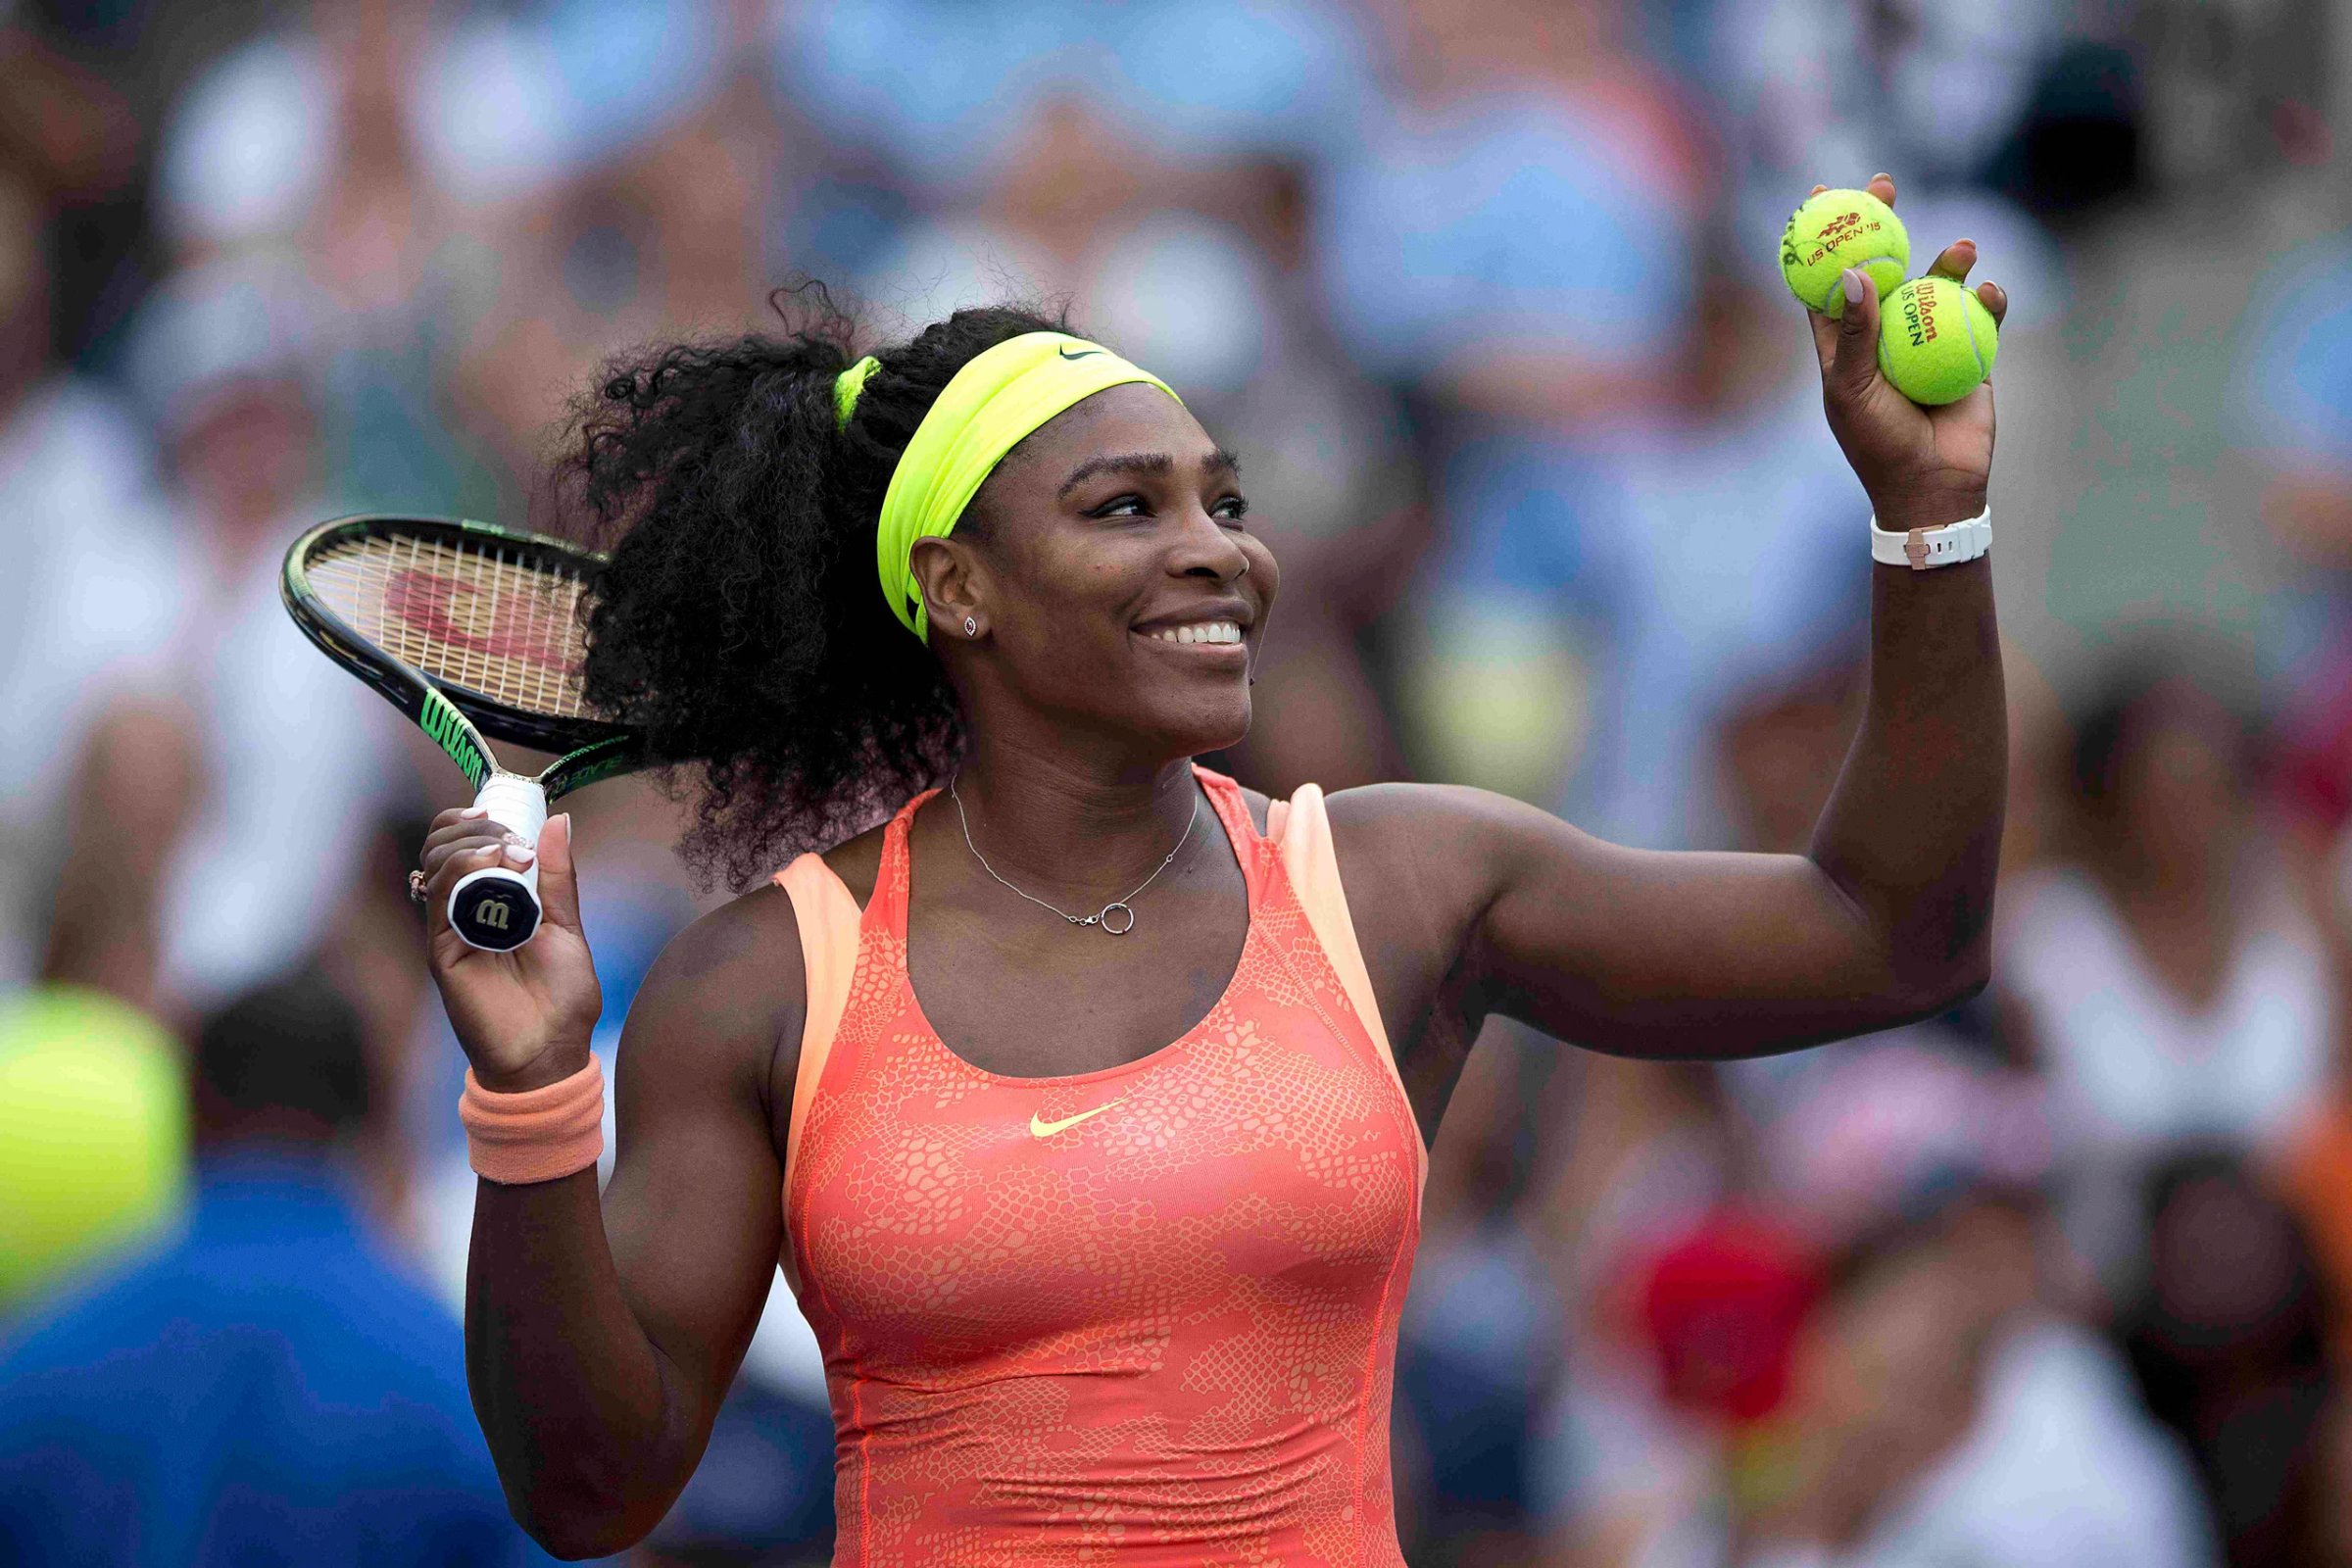 Serena Williams of the U.S. hits tennis balls to the fans after defeating compatriot Madison Keys in their fourth round match at the U.S. Open Championships tennis tournament in New York, September 6, 2015. REUTERS/Carlo Allegri